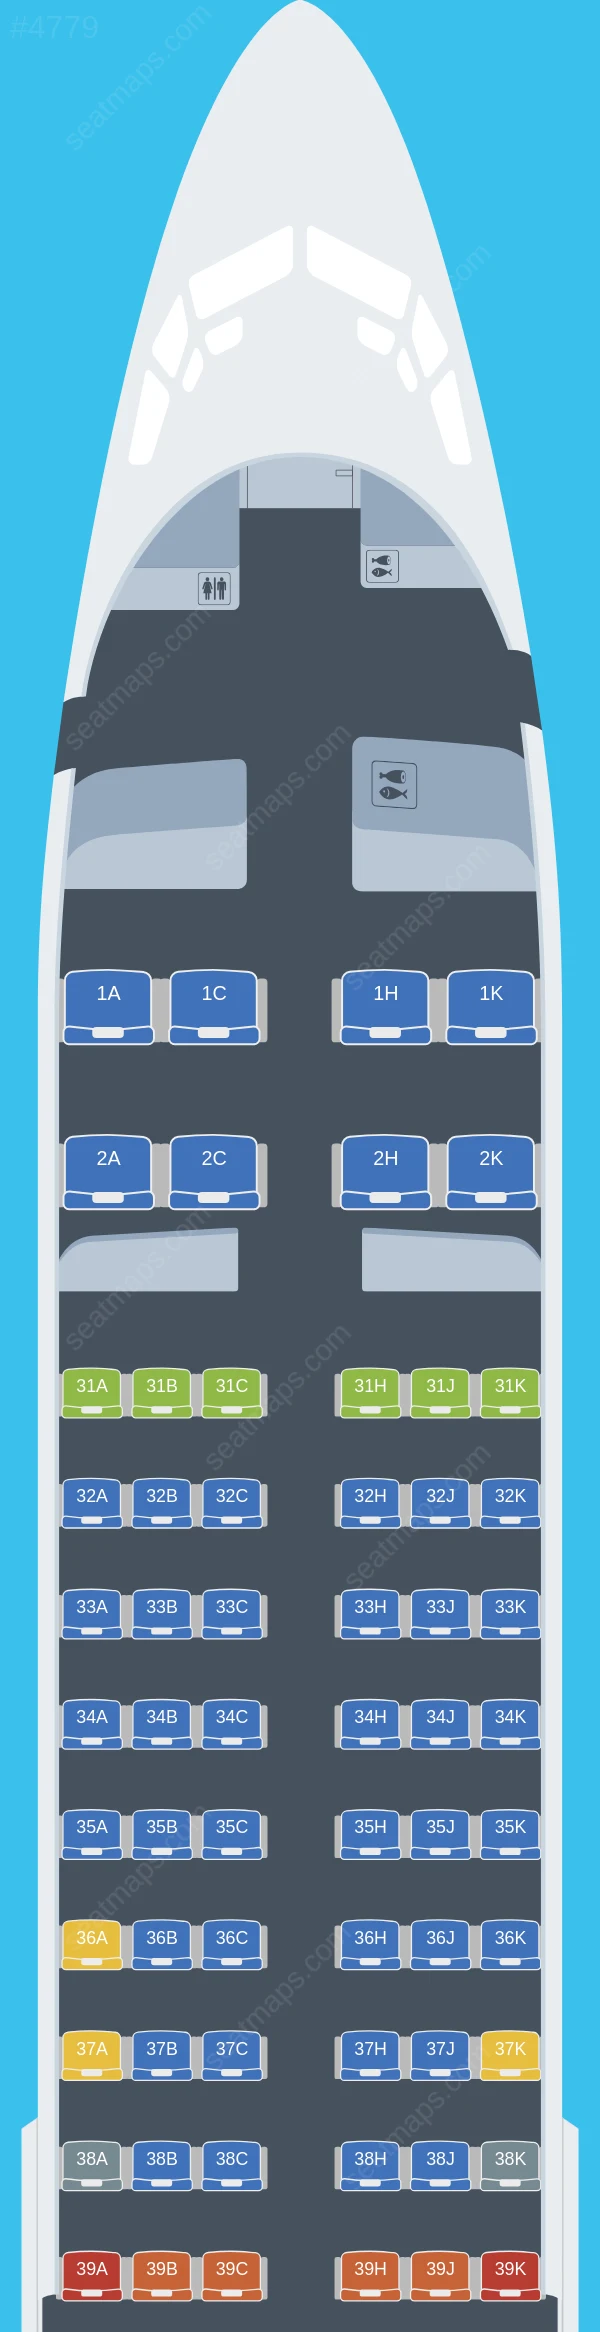 Grand China Air Boeing 737-800 seatmap preview